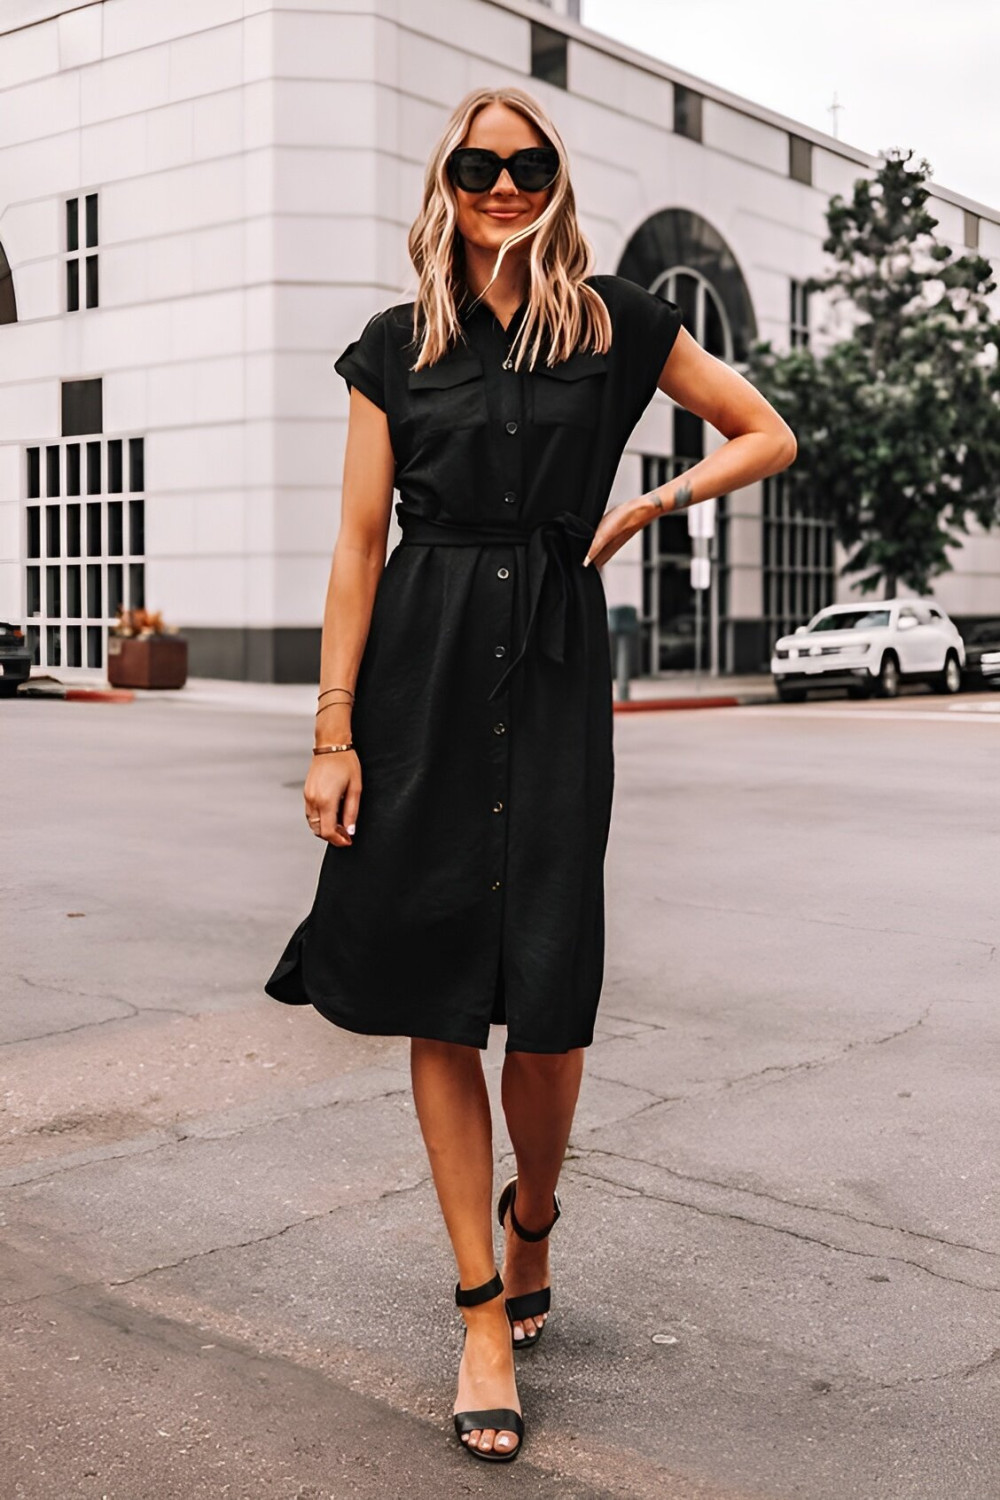 27 Breathtaking Little Black Dress Outfits For Stylish Girls - 227